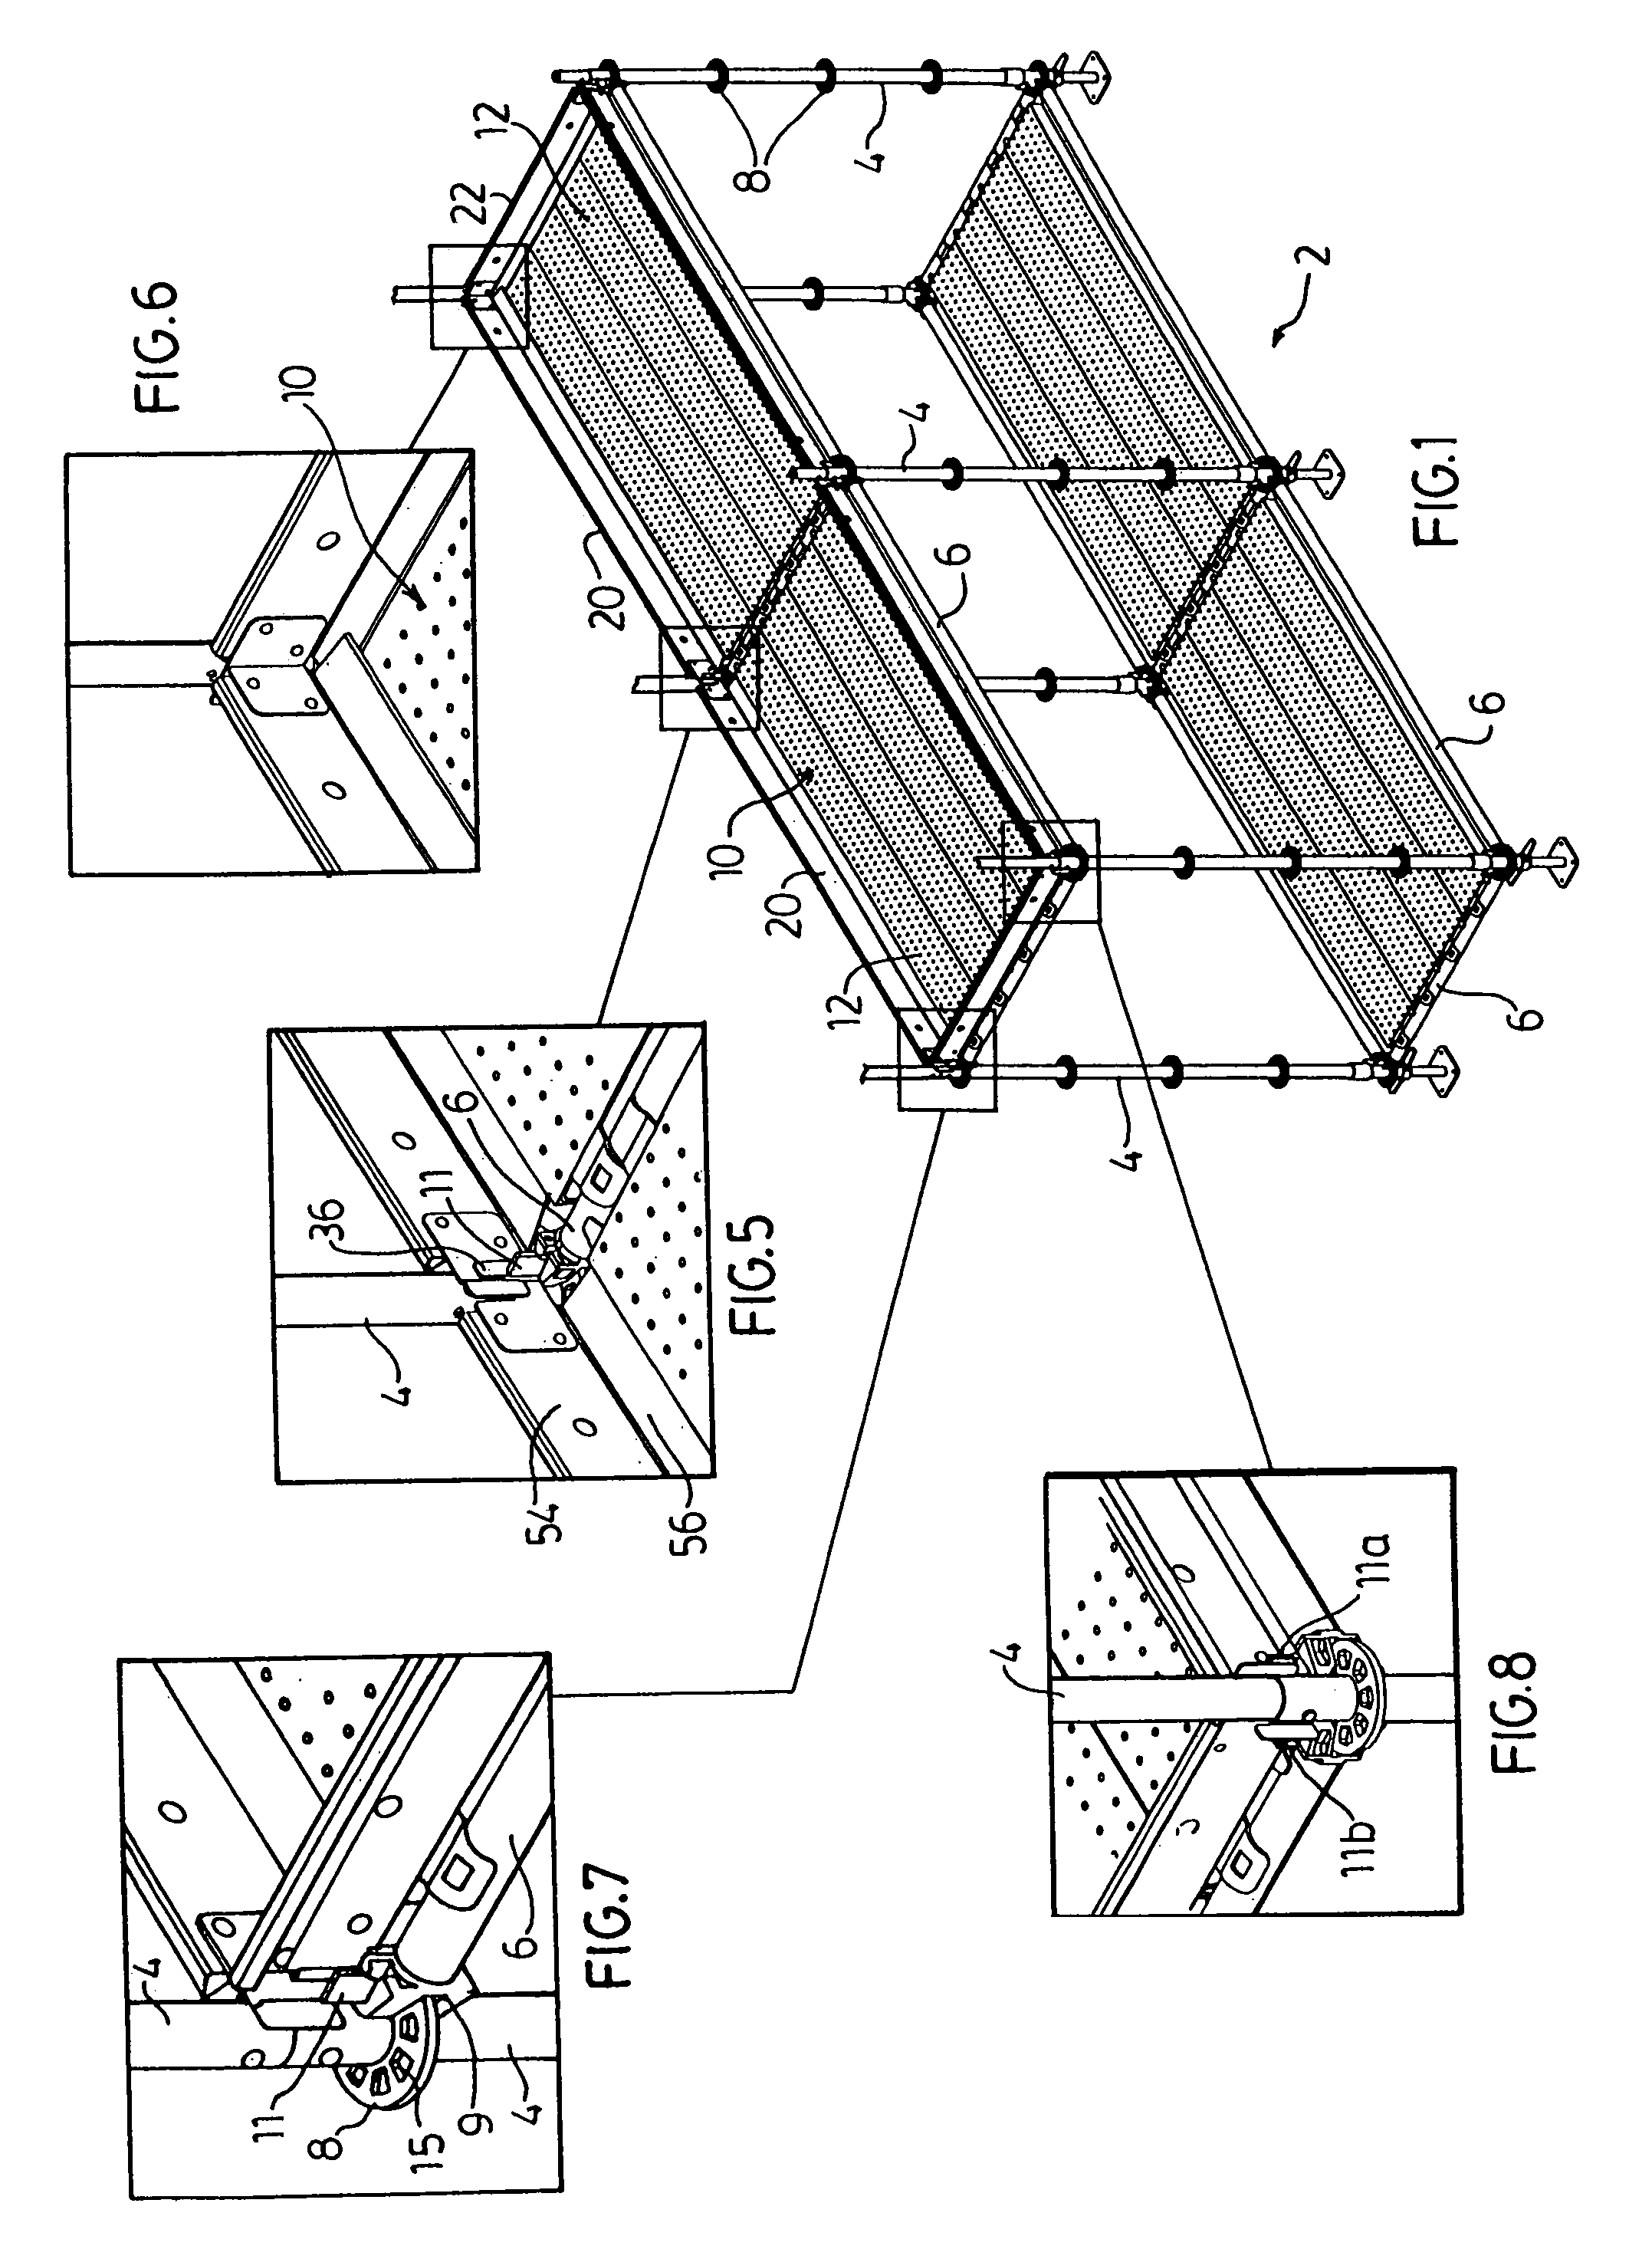 Toeboard system for scaffolding